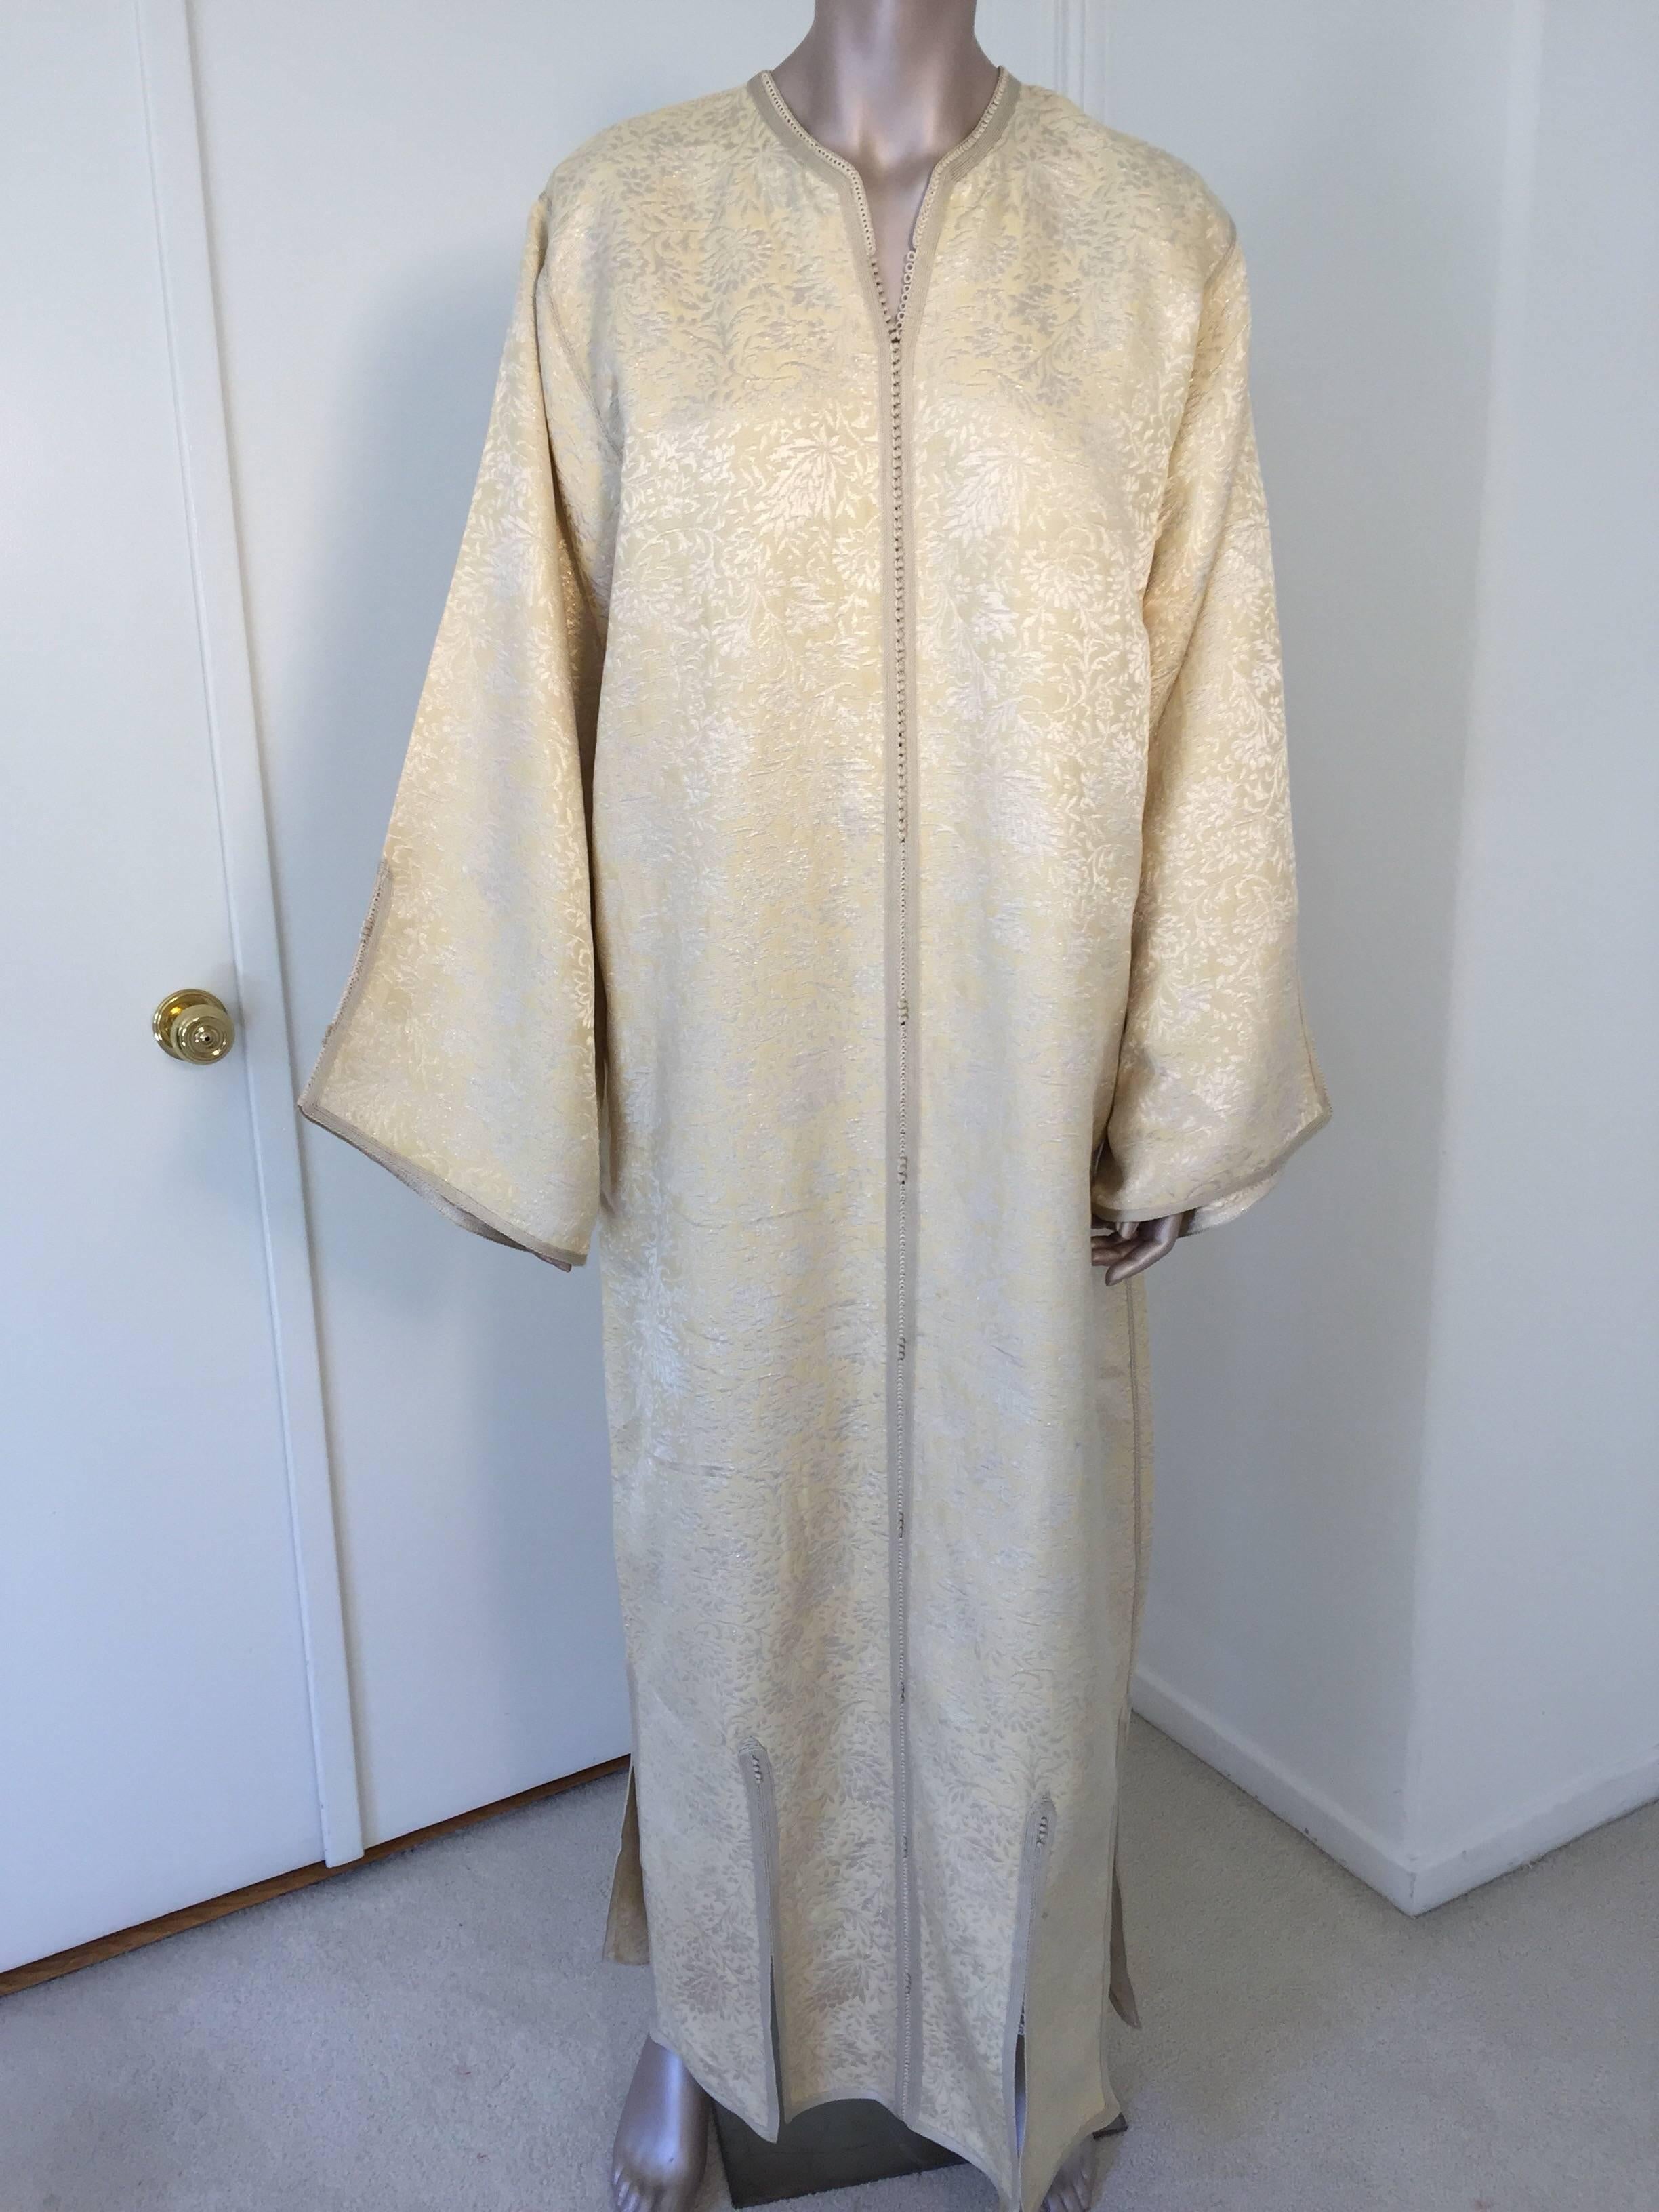 Moroccan caftan, Evening or interior gold and silver brocade dress kaftan with fine trim.
Hand-made ceremonial caftan from North Africa, Morocco.
Vintage exotic 1970s gold and silver brocade caftan gown.
The luminous caftan maxi dress caftan is